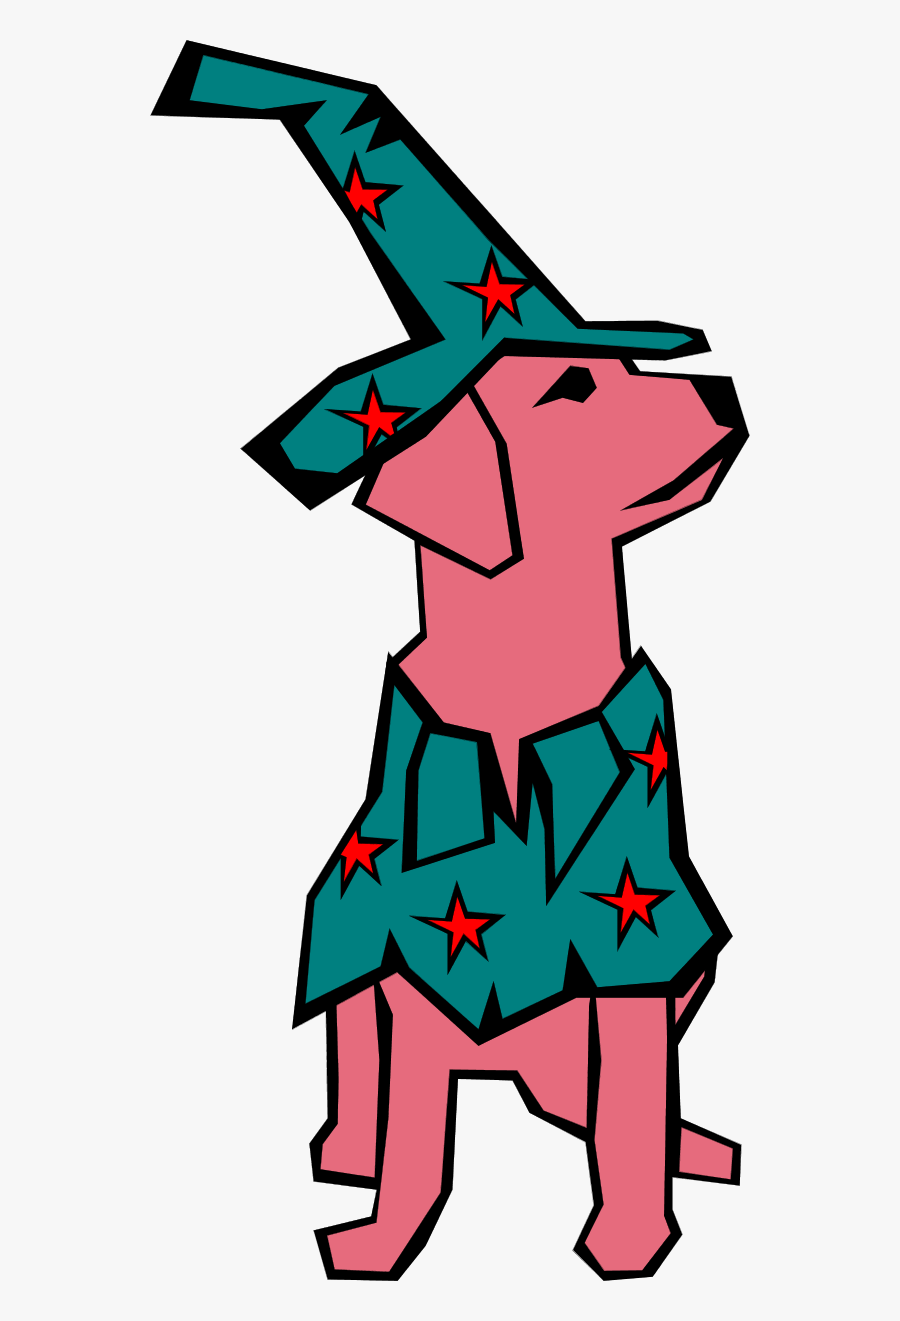 Dog Sitting Wearing Tall Hat - Halloween Costumes For Pets Clip Art, Transparent Clipart